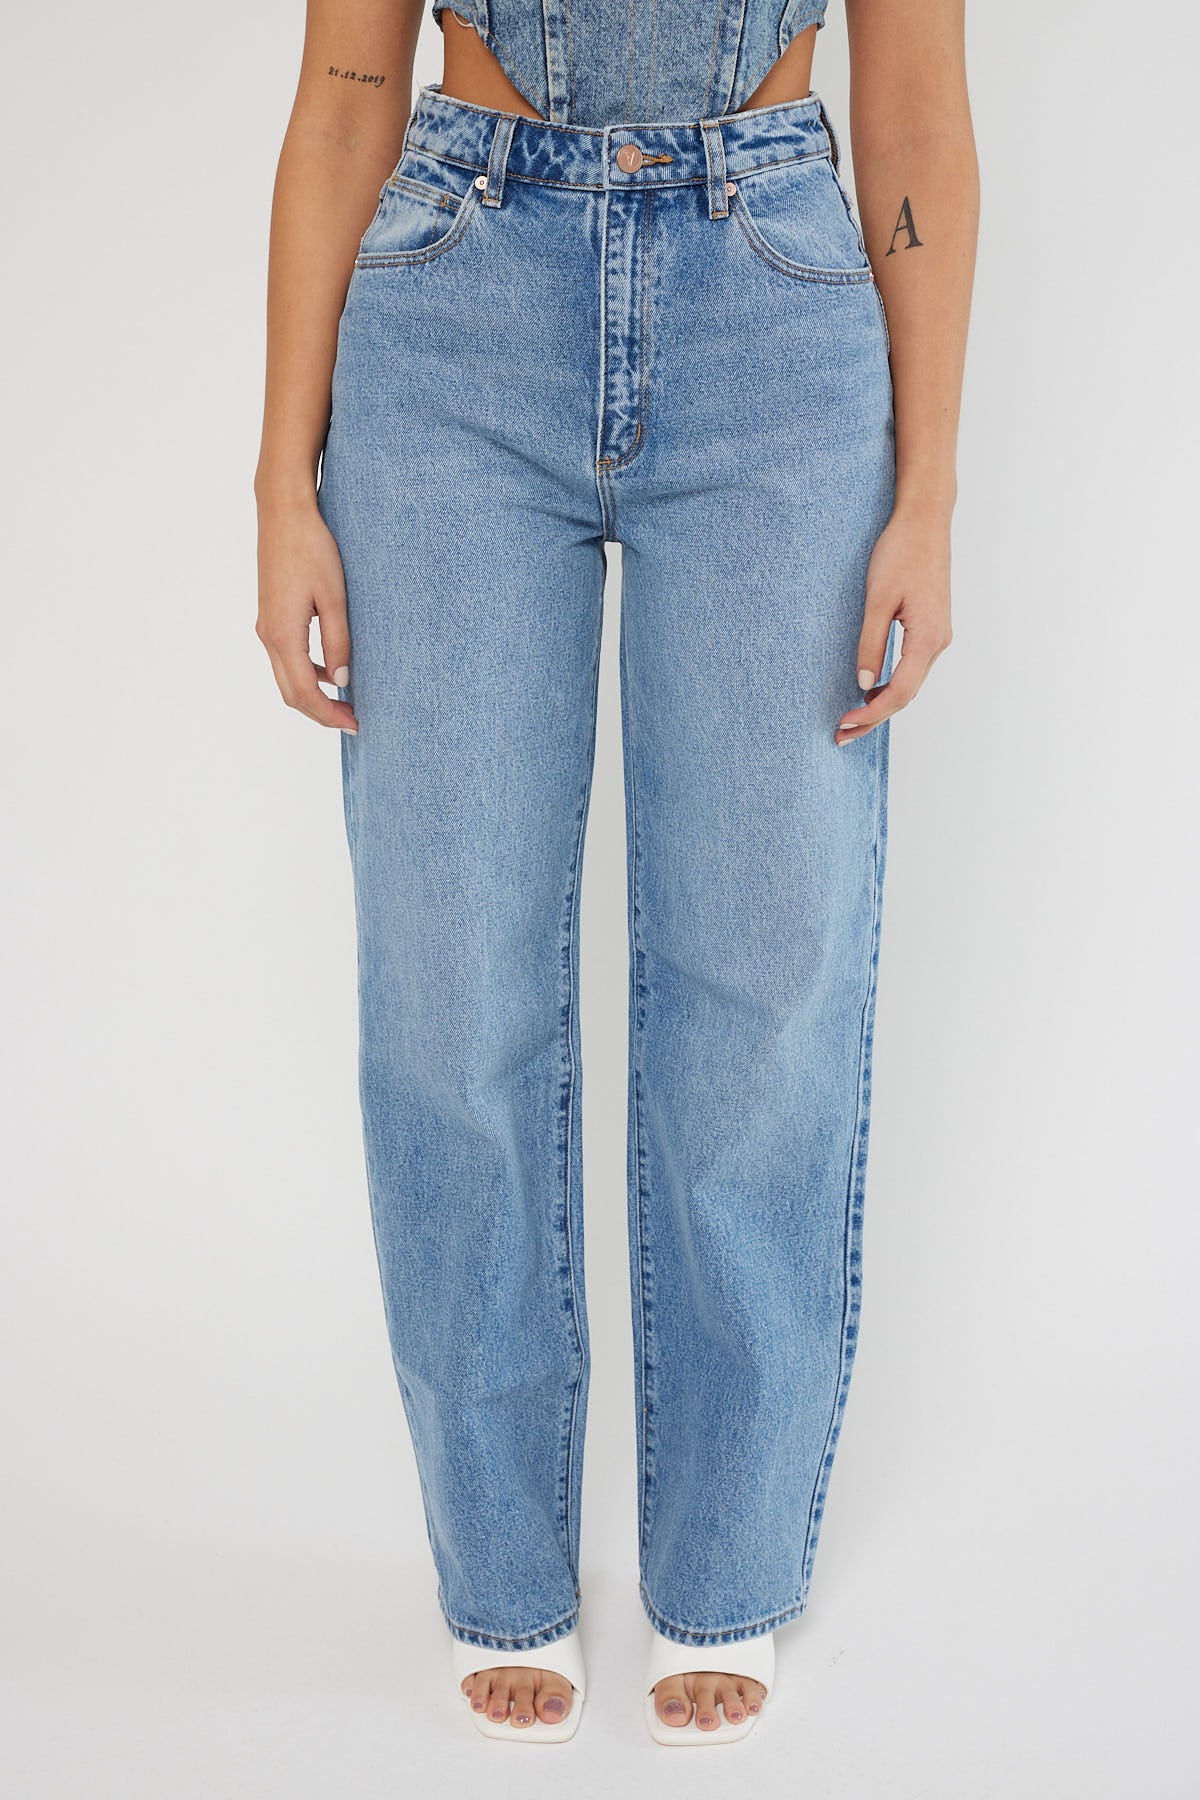 Abrand A Carrie Jean Maggie Organic – Universal Store